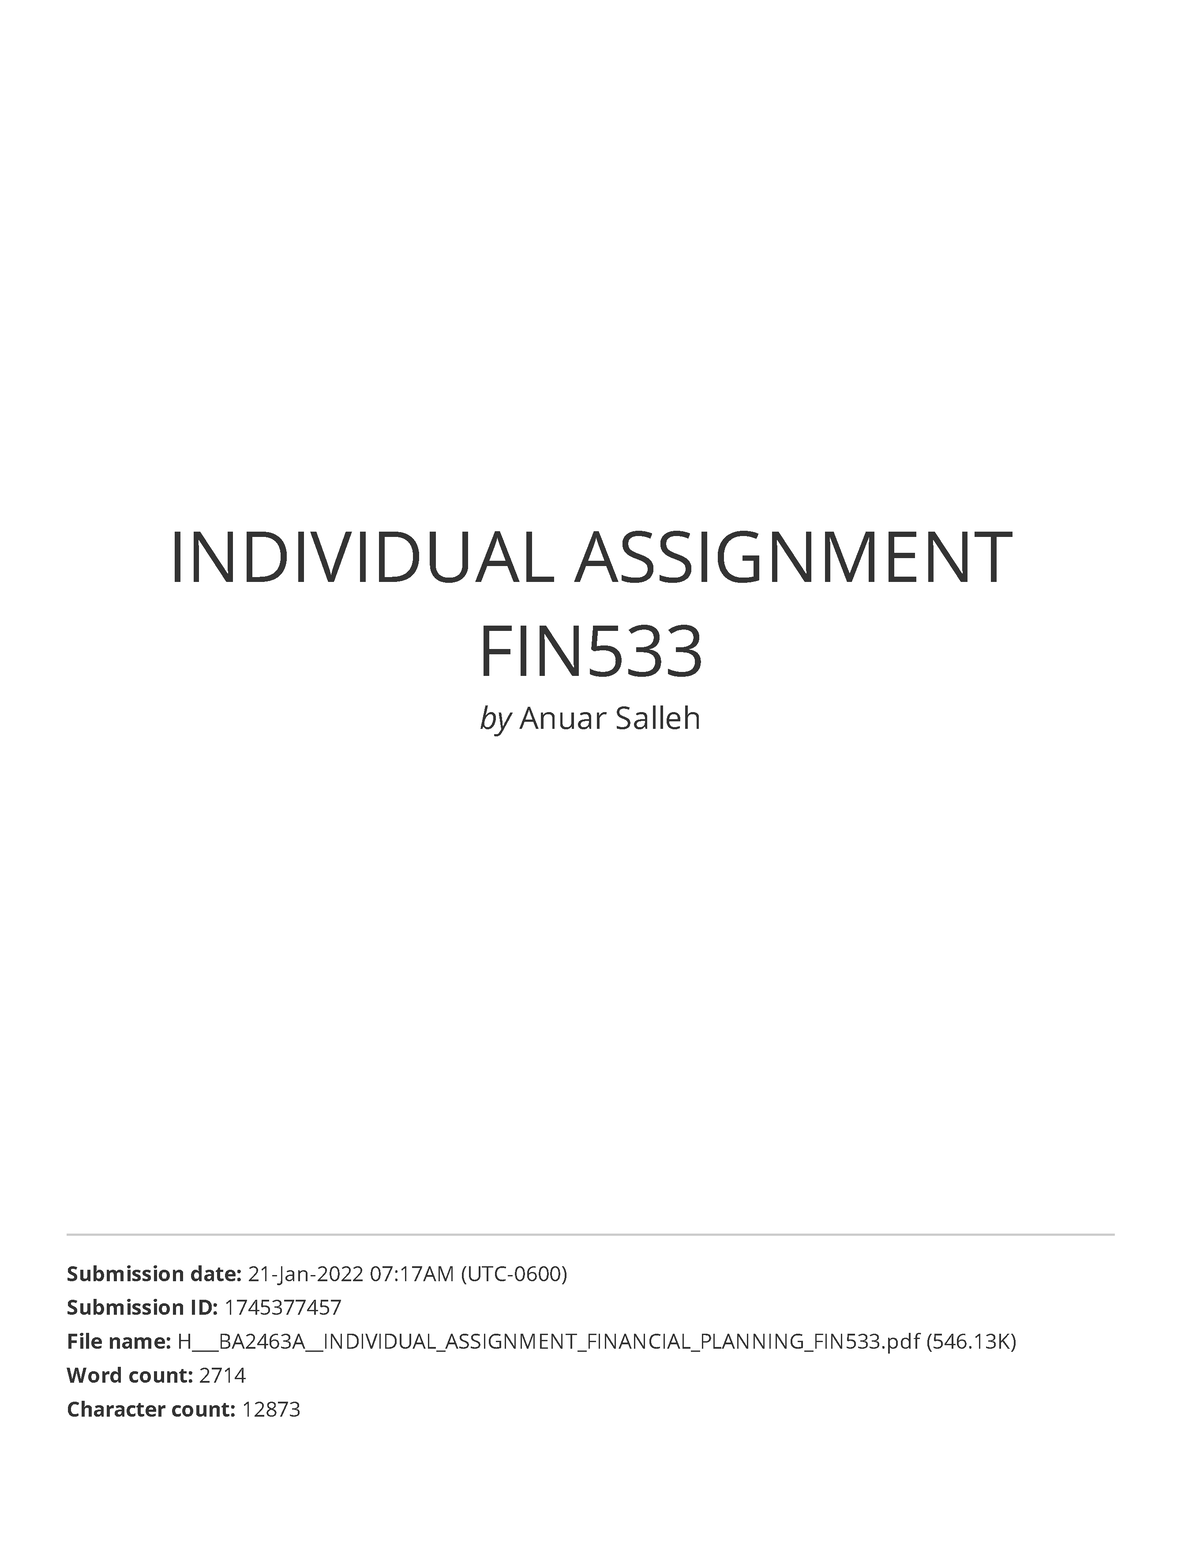 fin533 individual assignment infographic